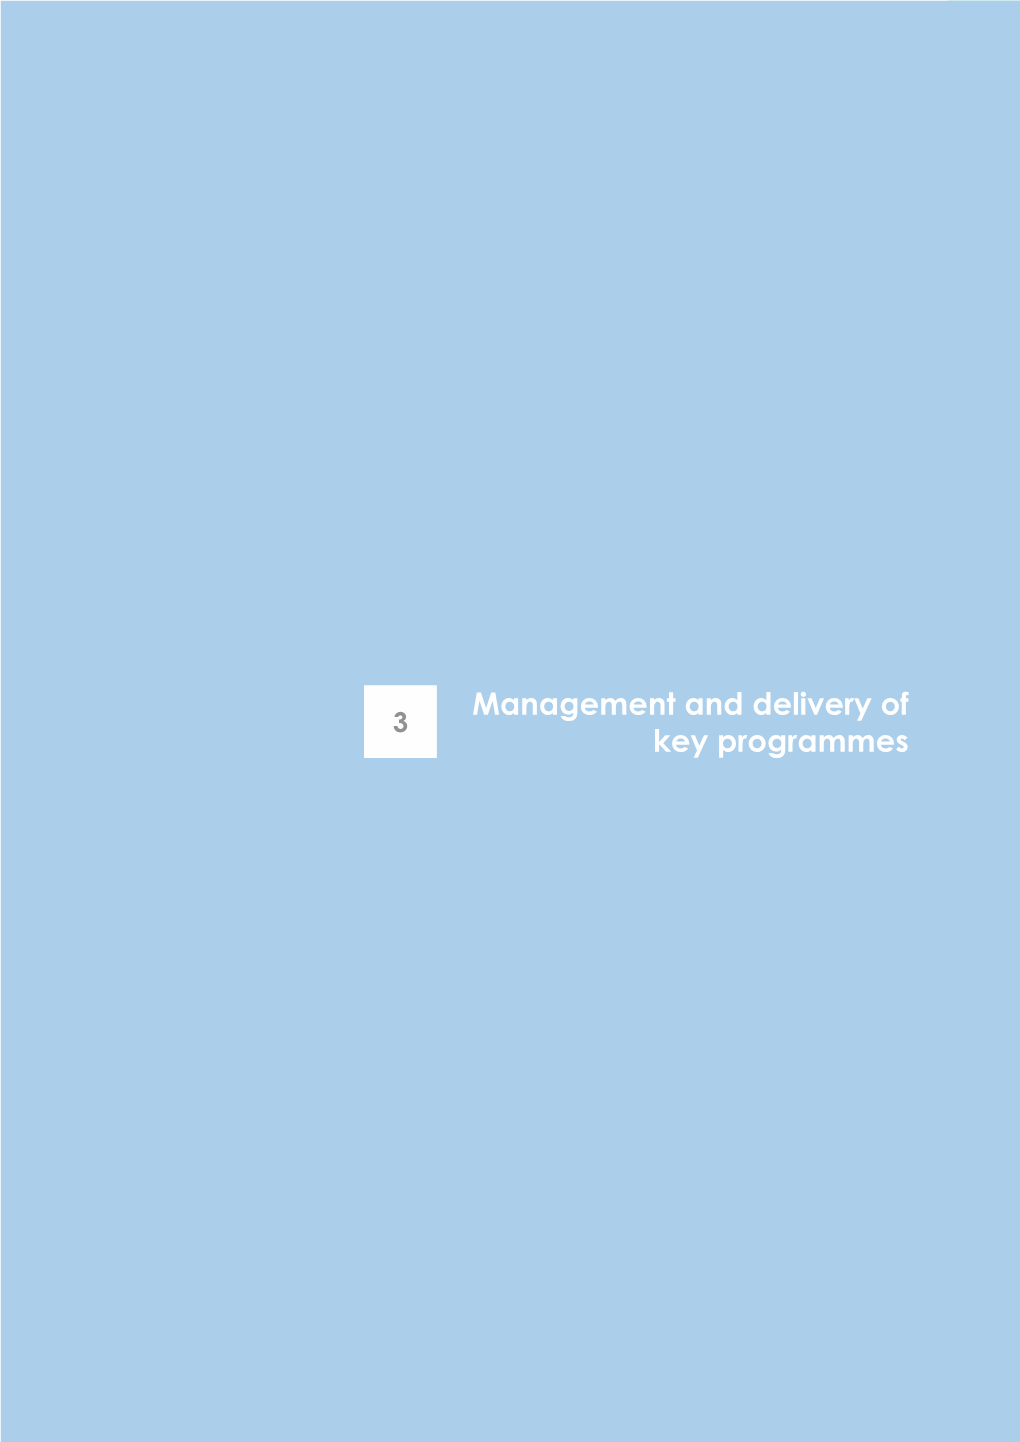 Section 3: Management and Delivery of Key Programmes